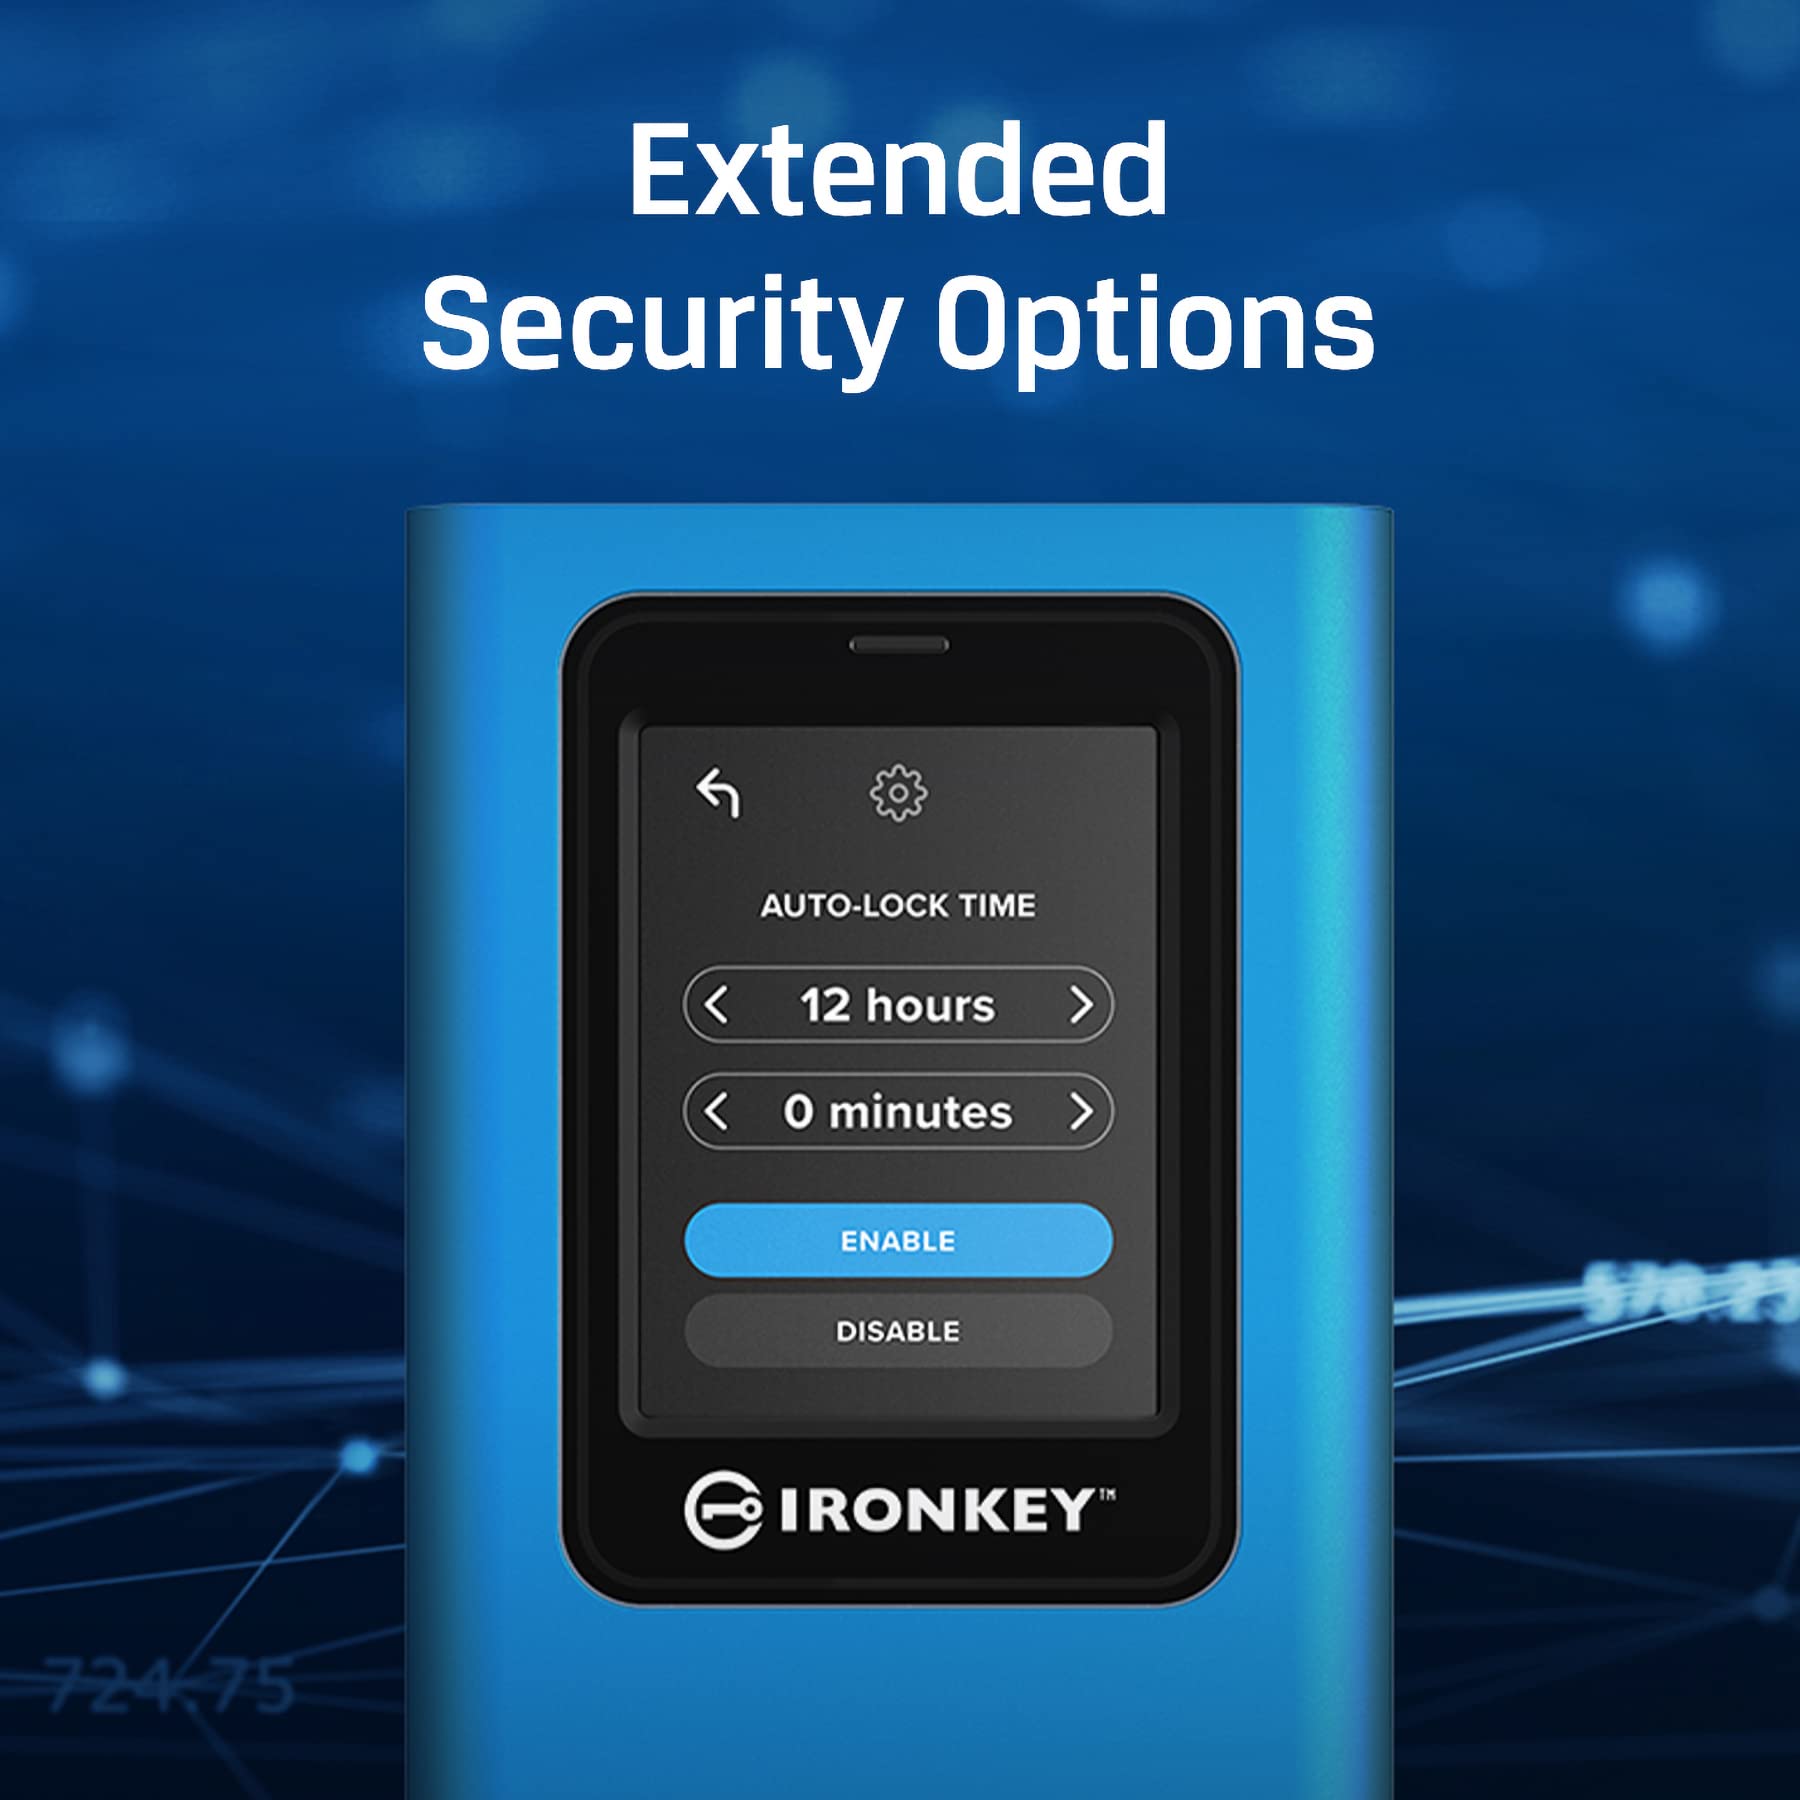 Kingston IronKey Vault Privacy 80 1.92TB External SSD | FIPS 197 | XTS-AES 256GB Encrypted | Touch Screen PIN | Secure Data Protection | IKVP80ES/1920G